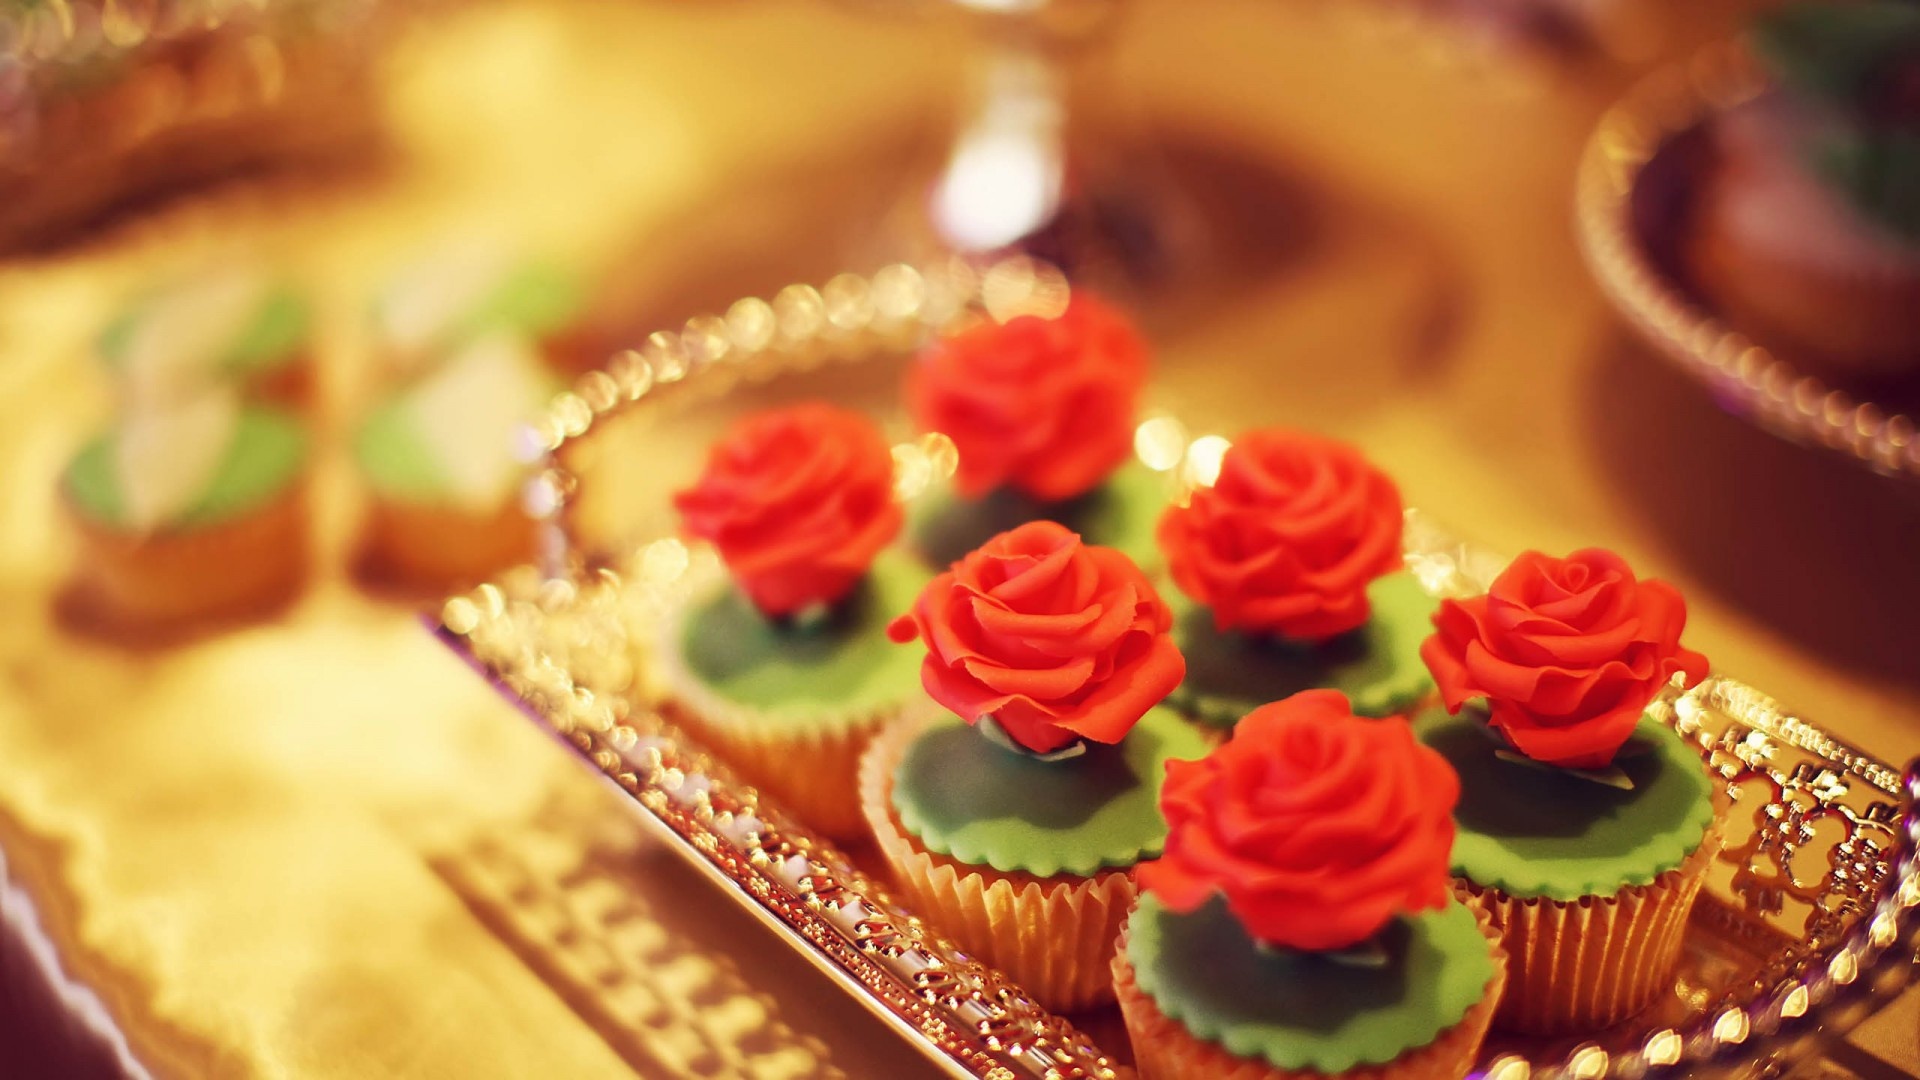 Rose cupcakes, Food wallpaper, Free pictures, HD quality, 1920x1080 Full HD Desktop